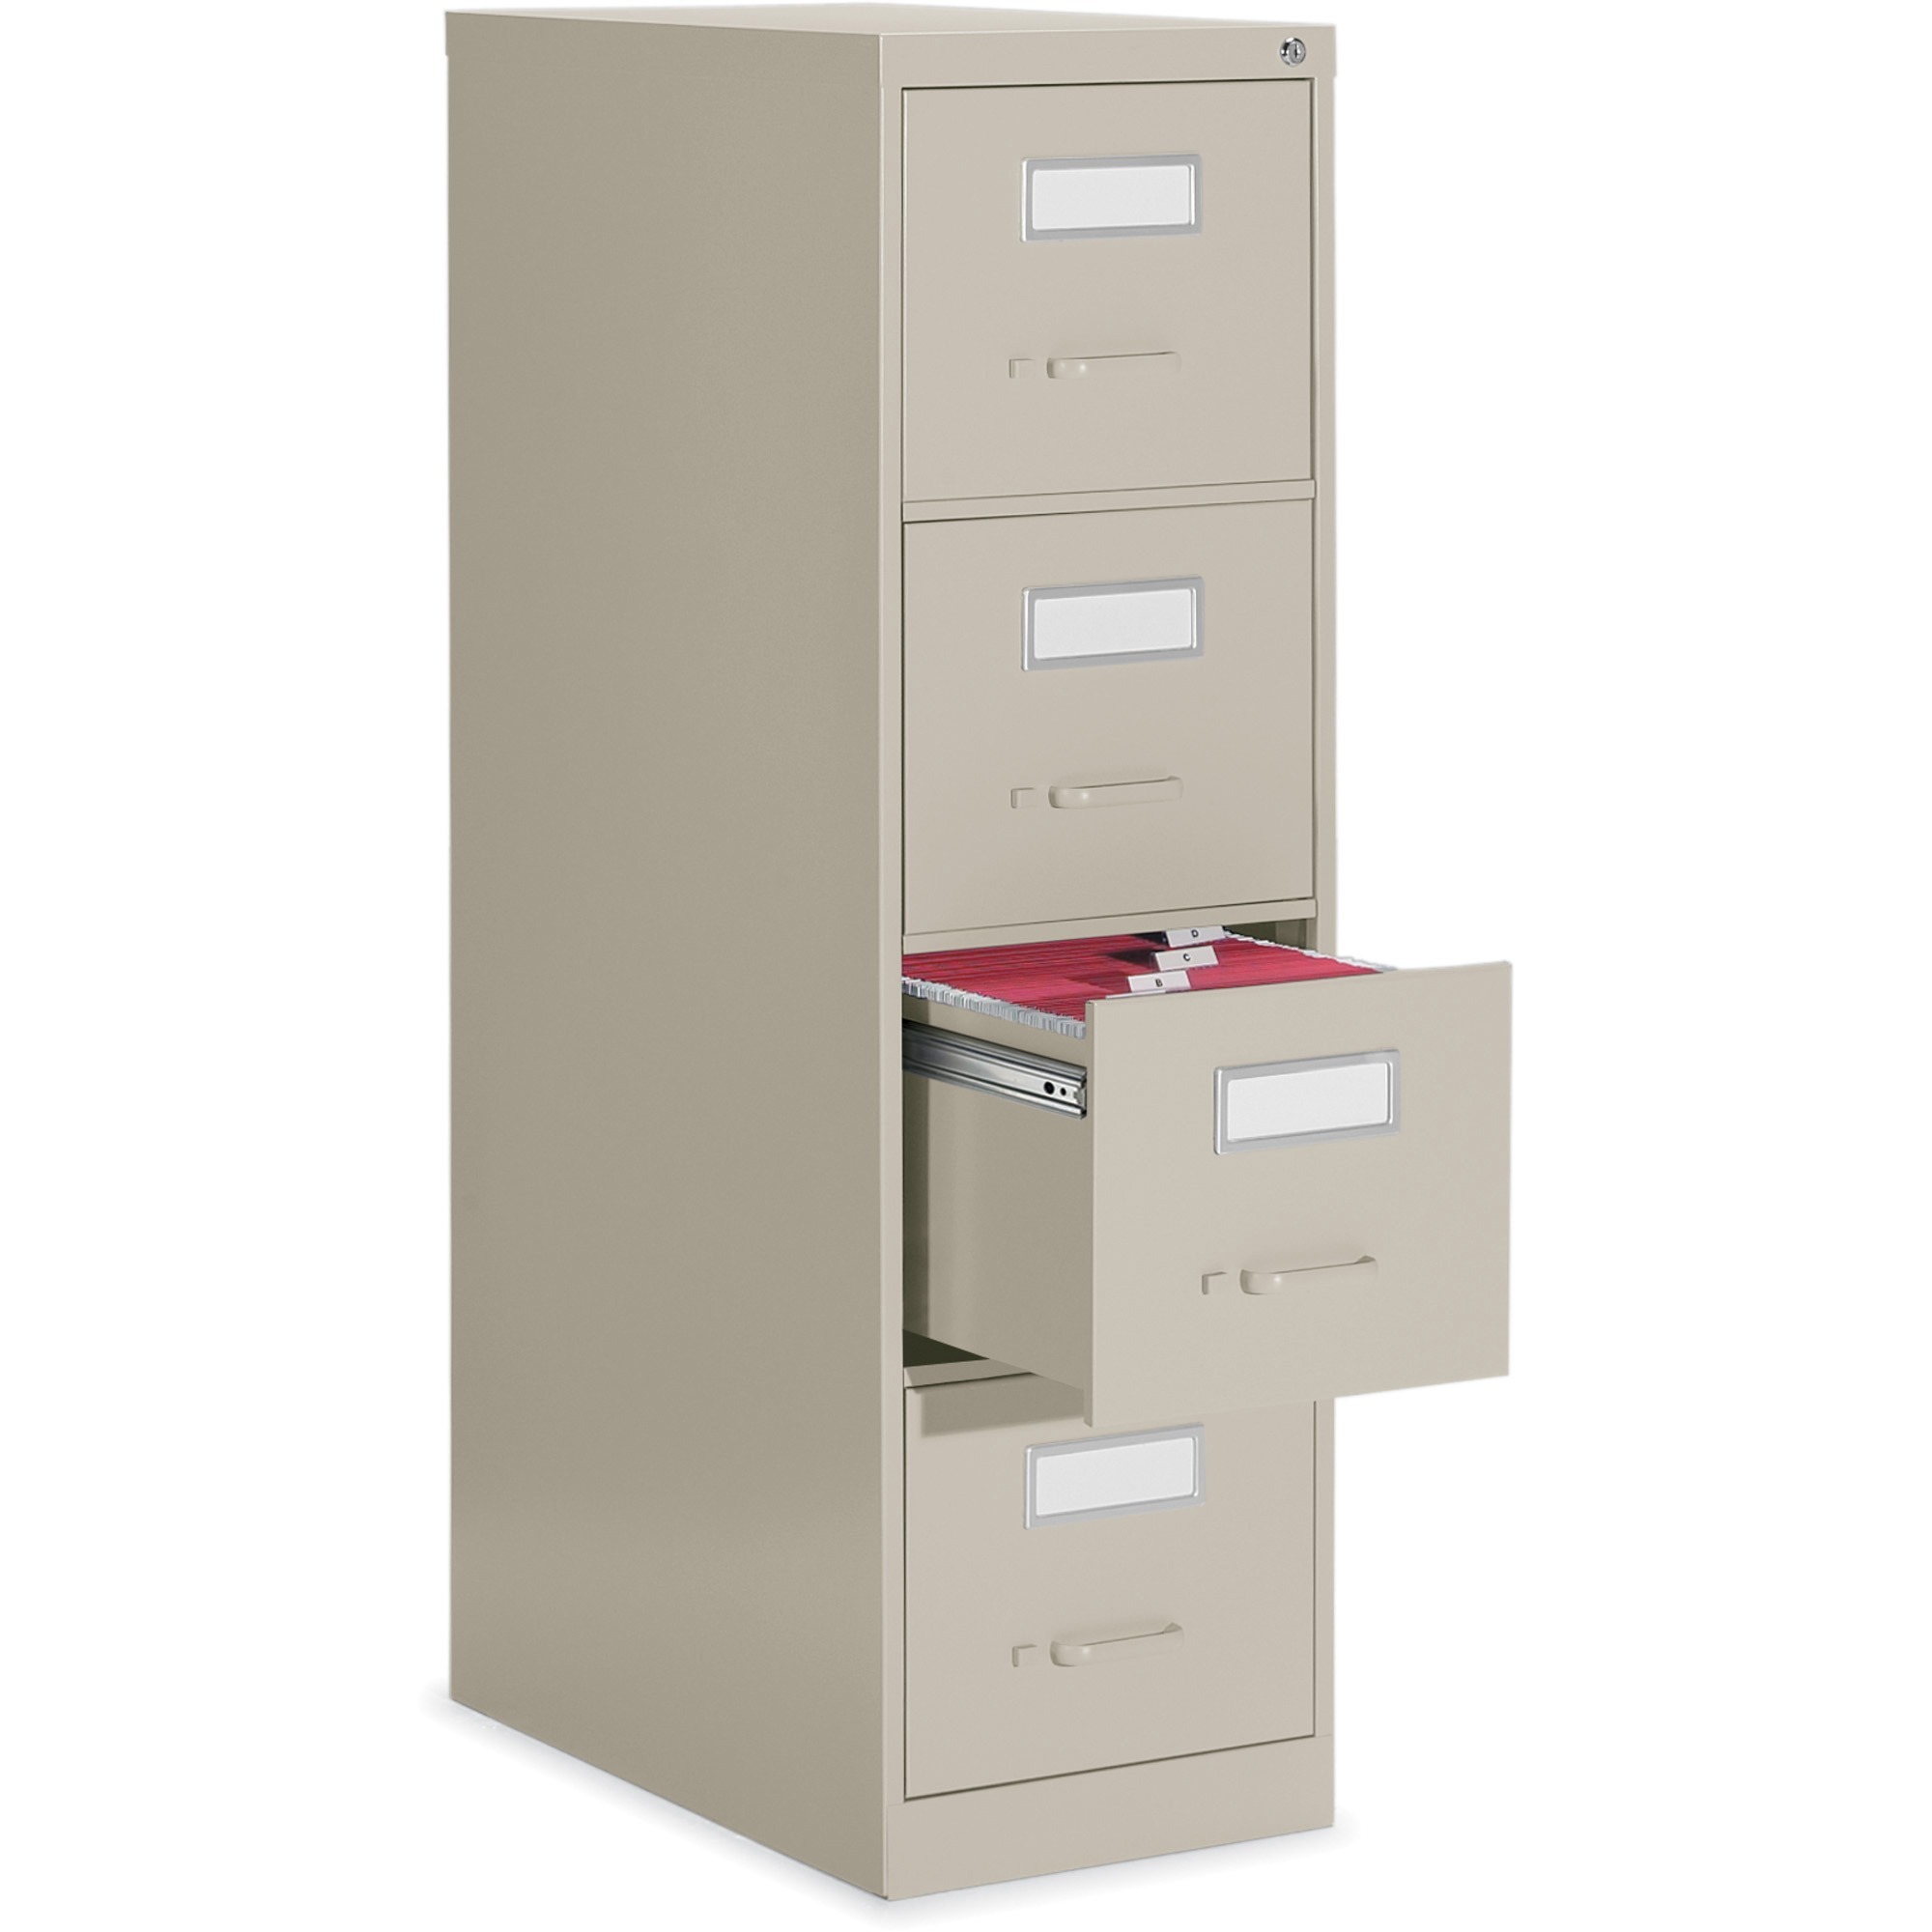 Global 2600 Vertical File Cabinet 15 X 26 6 X 52 4 X Drawer